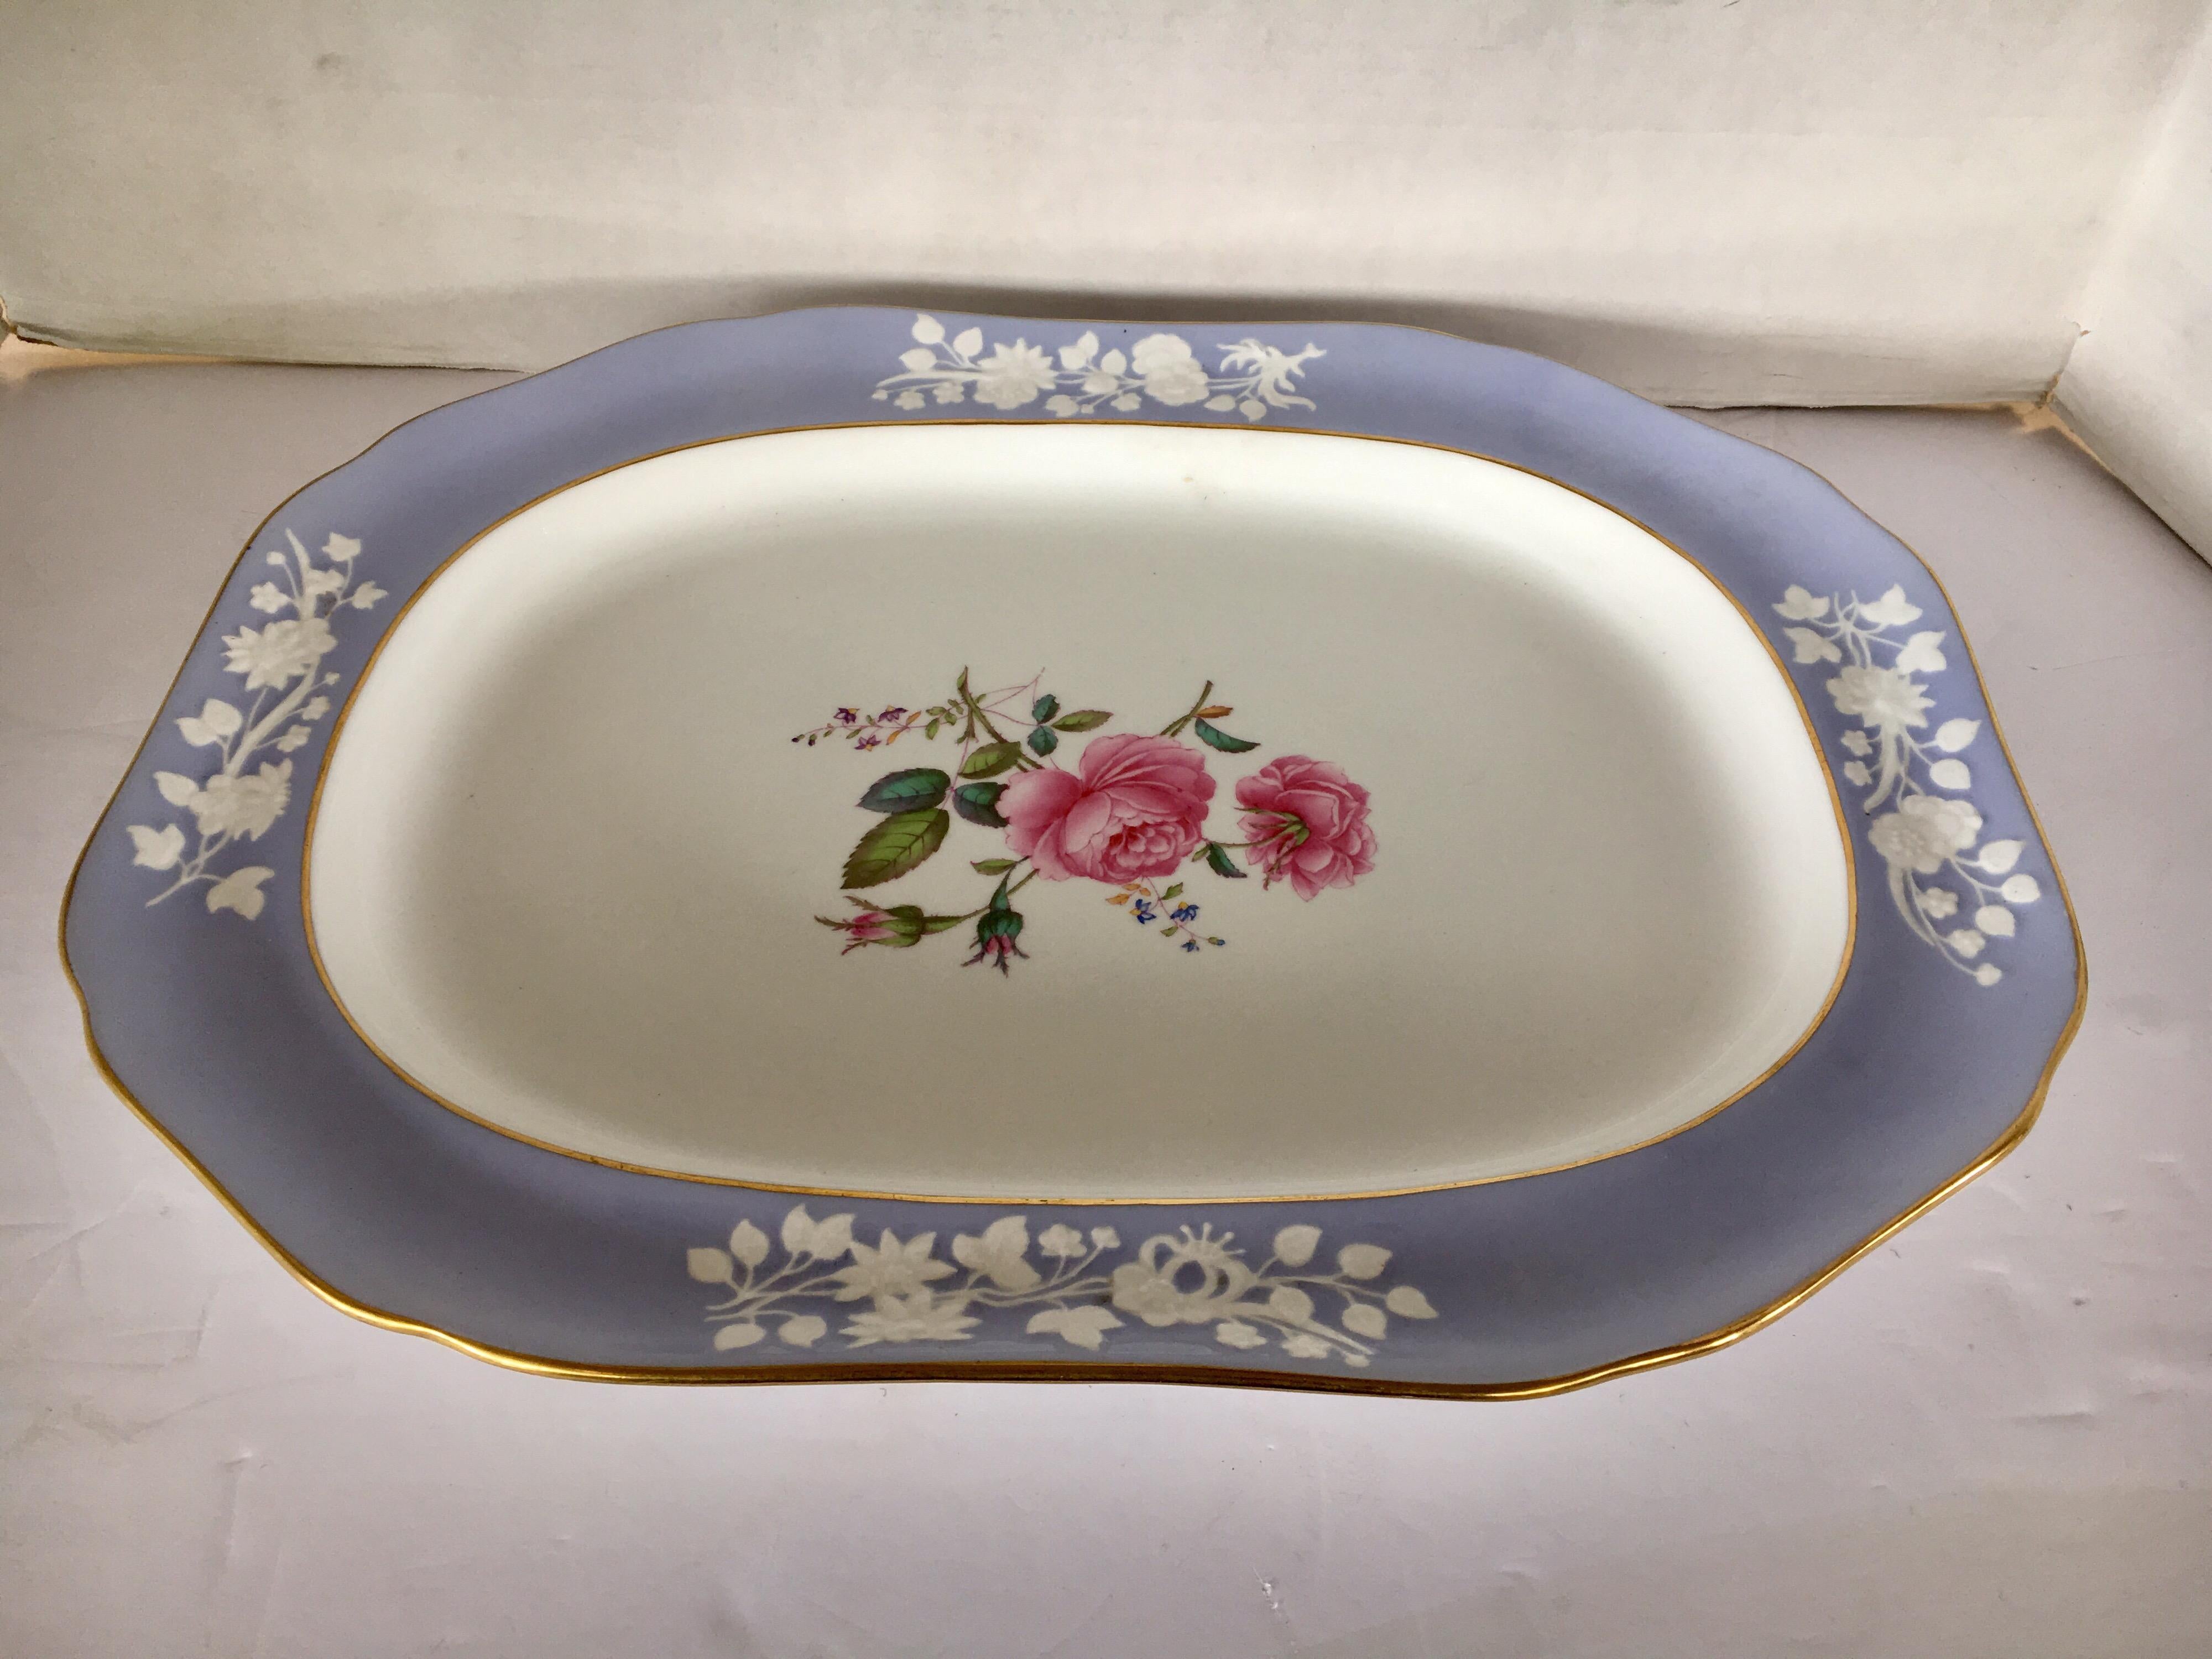 Spode fine China serving platter in the sough after maritime rose pattern.